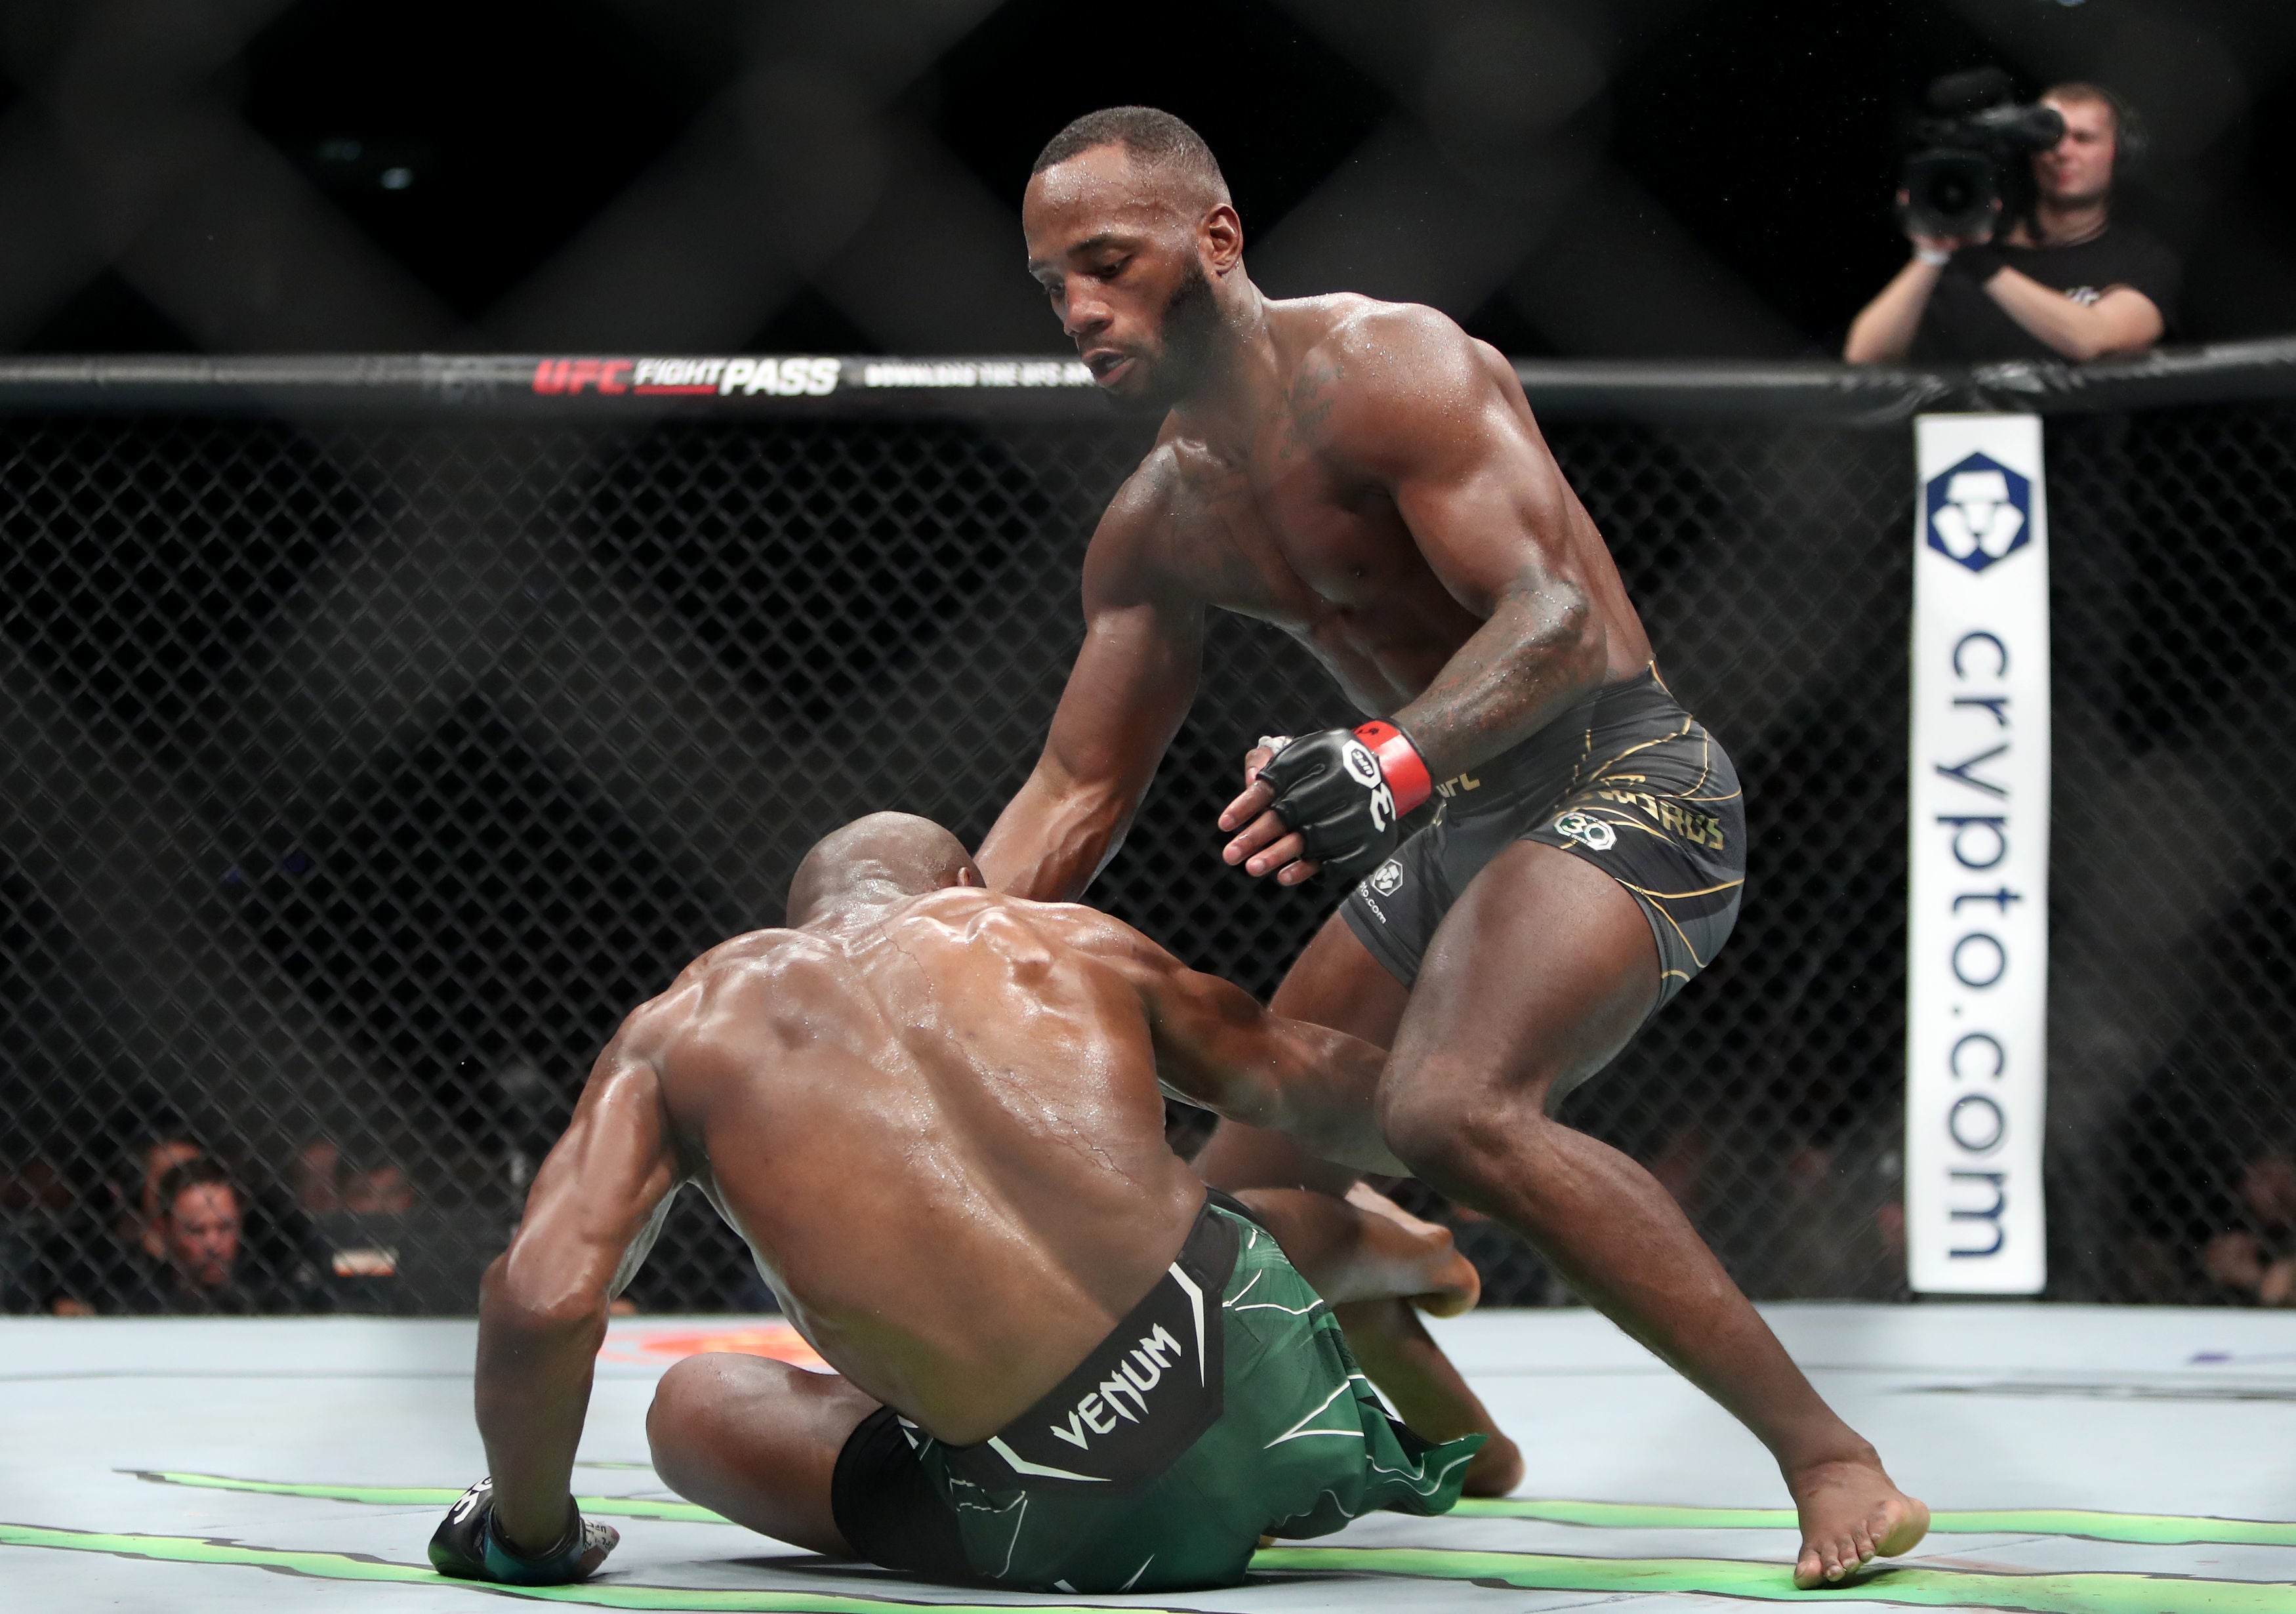 Leon Edwards (right) in his trilogy bout with Kamaru Usman in March